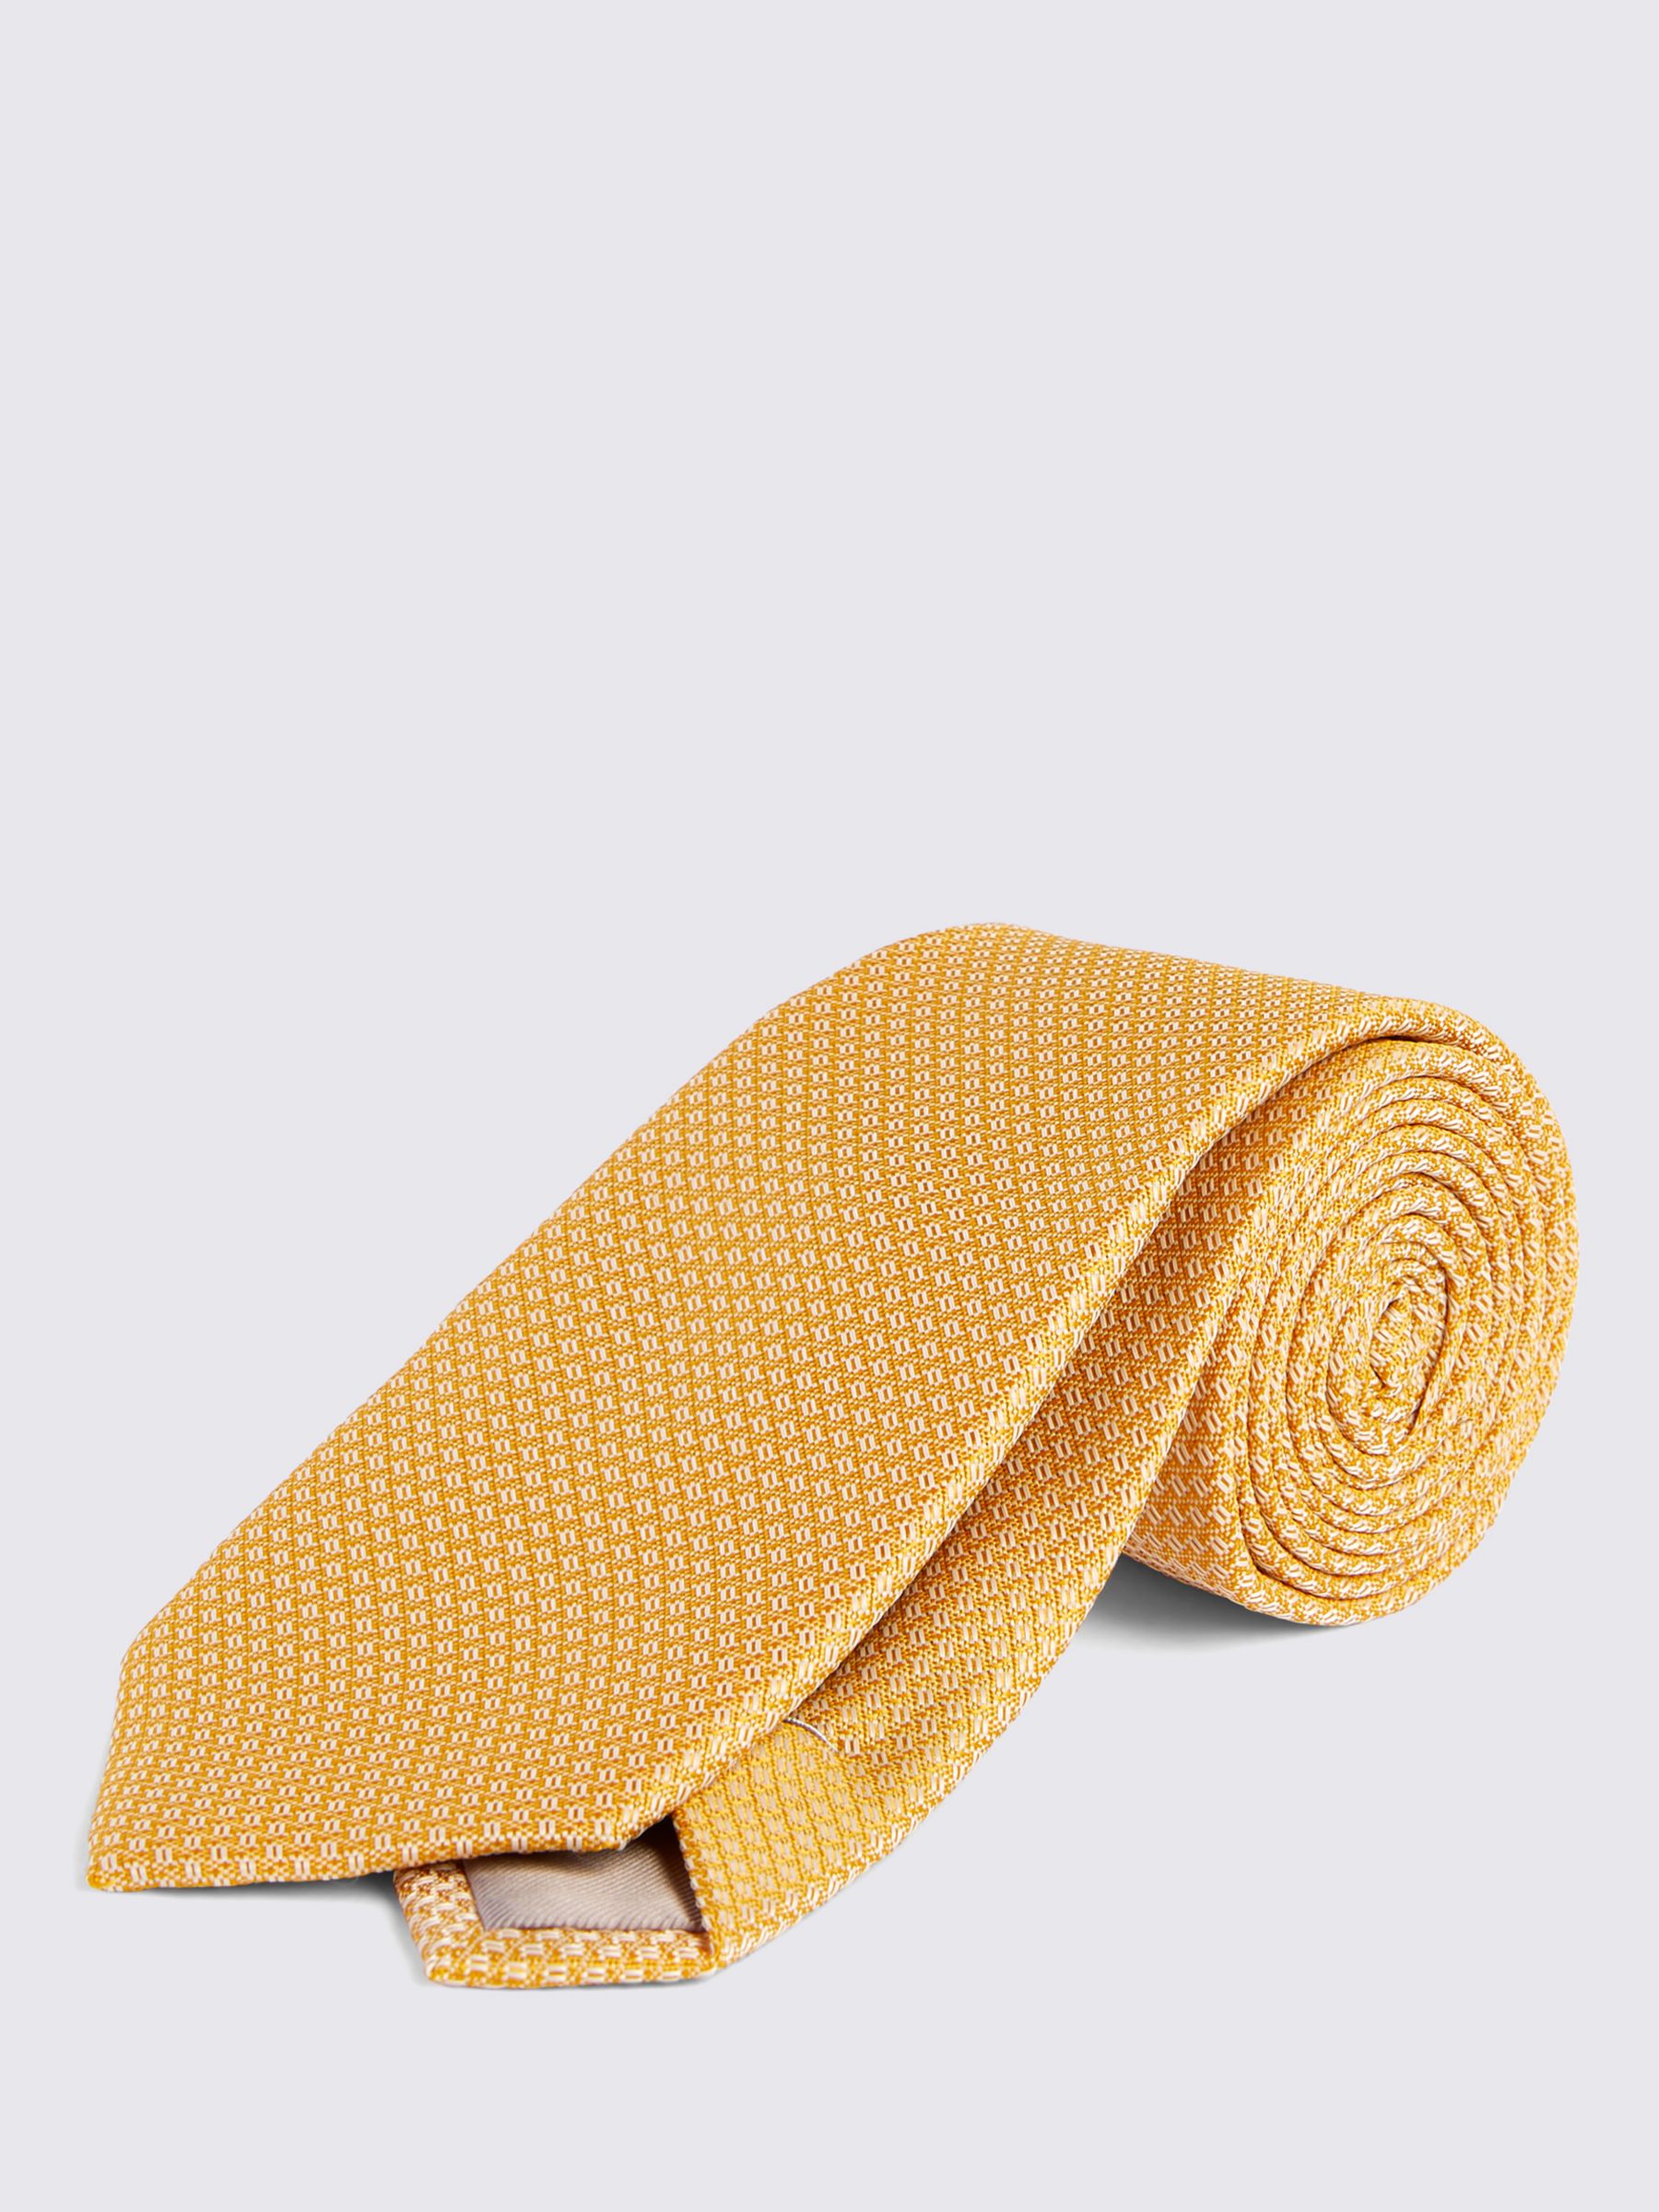 Moss Textured Tie, Yellow, One Size